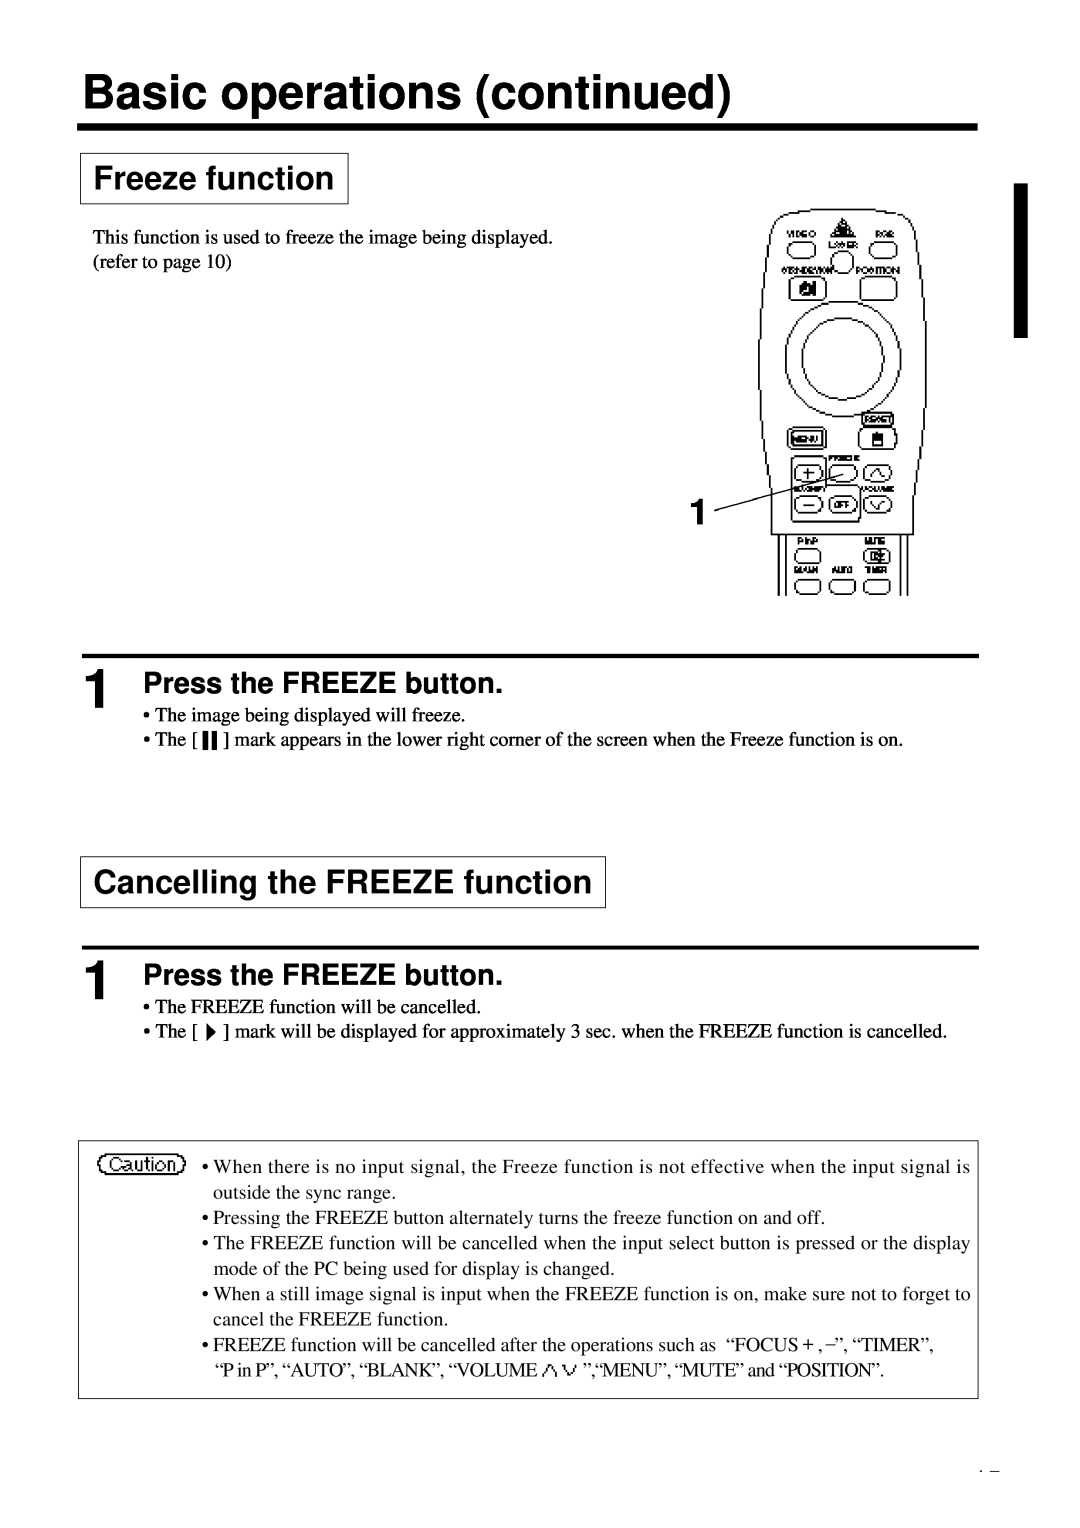 Polaroid PV 360 specifications Freeze function, Cancelling the FREEZE function, Basic operations continued 